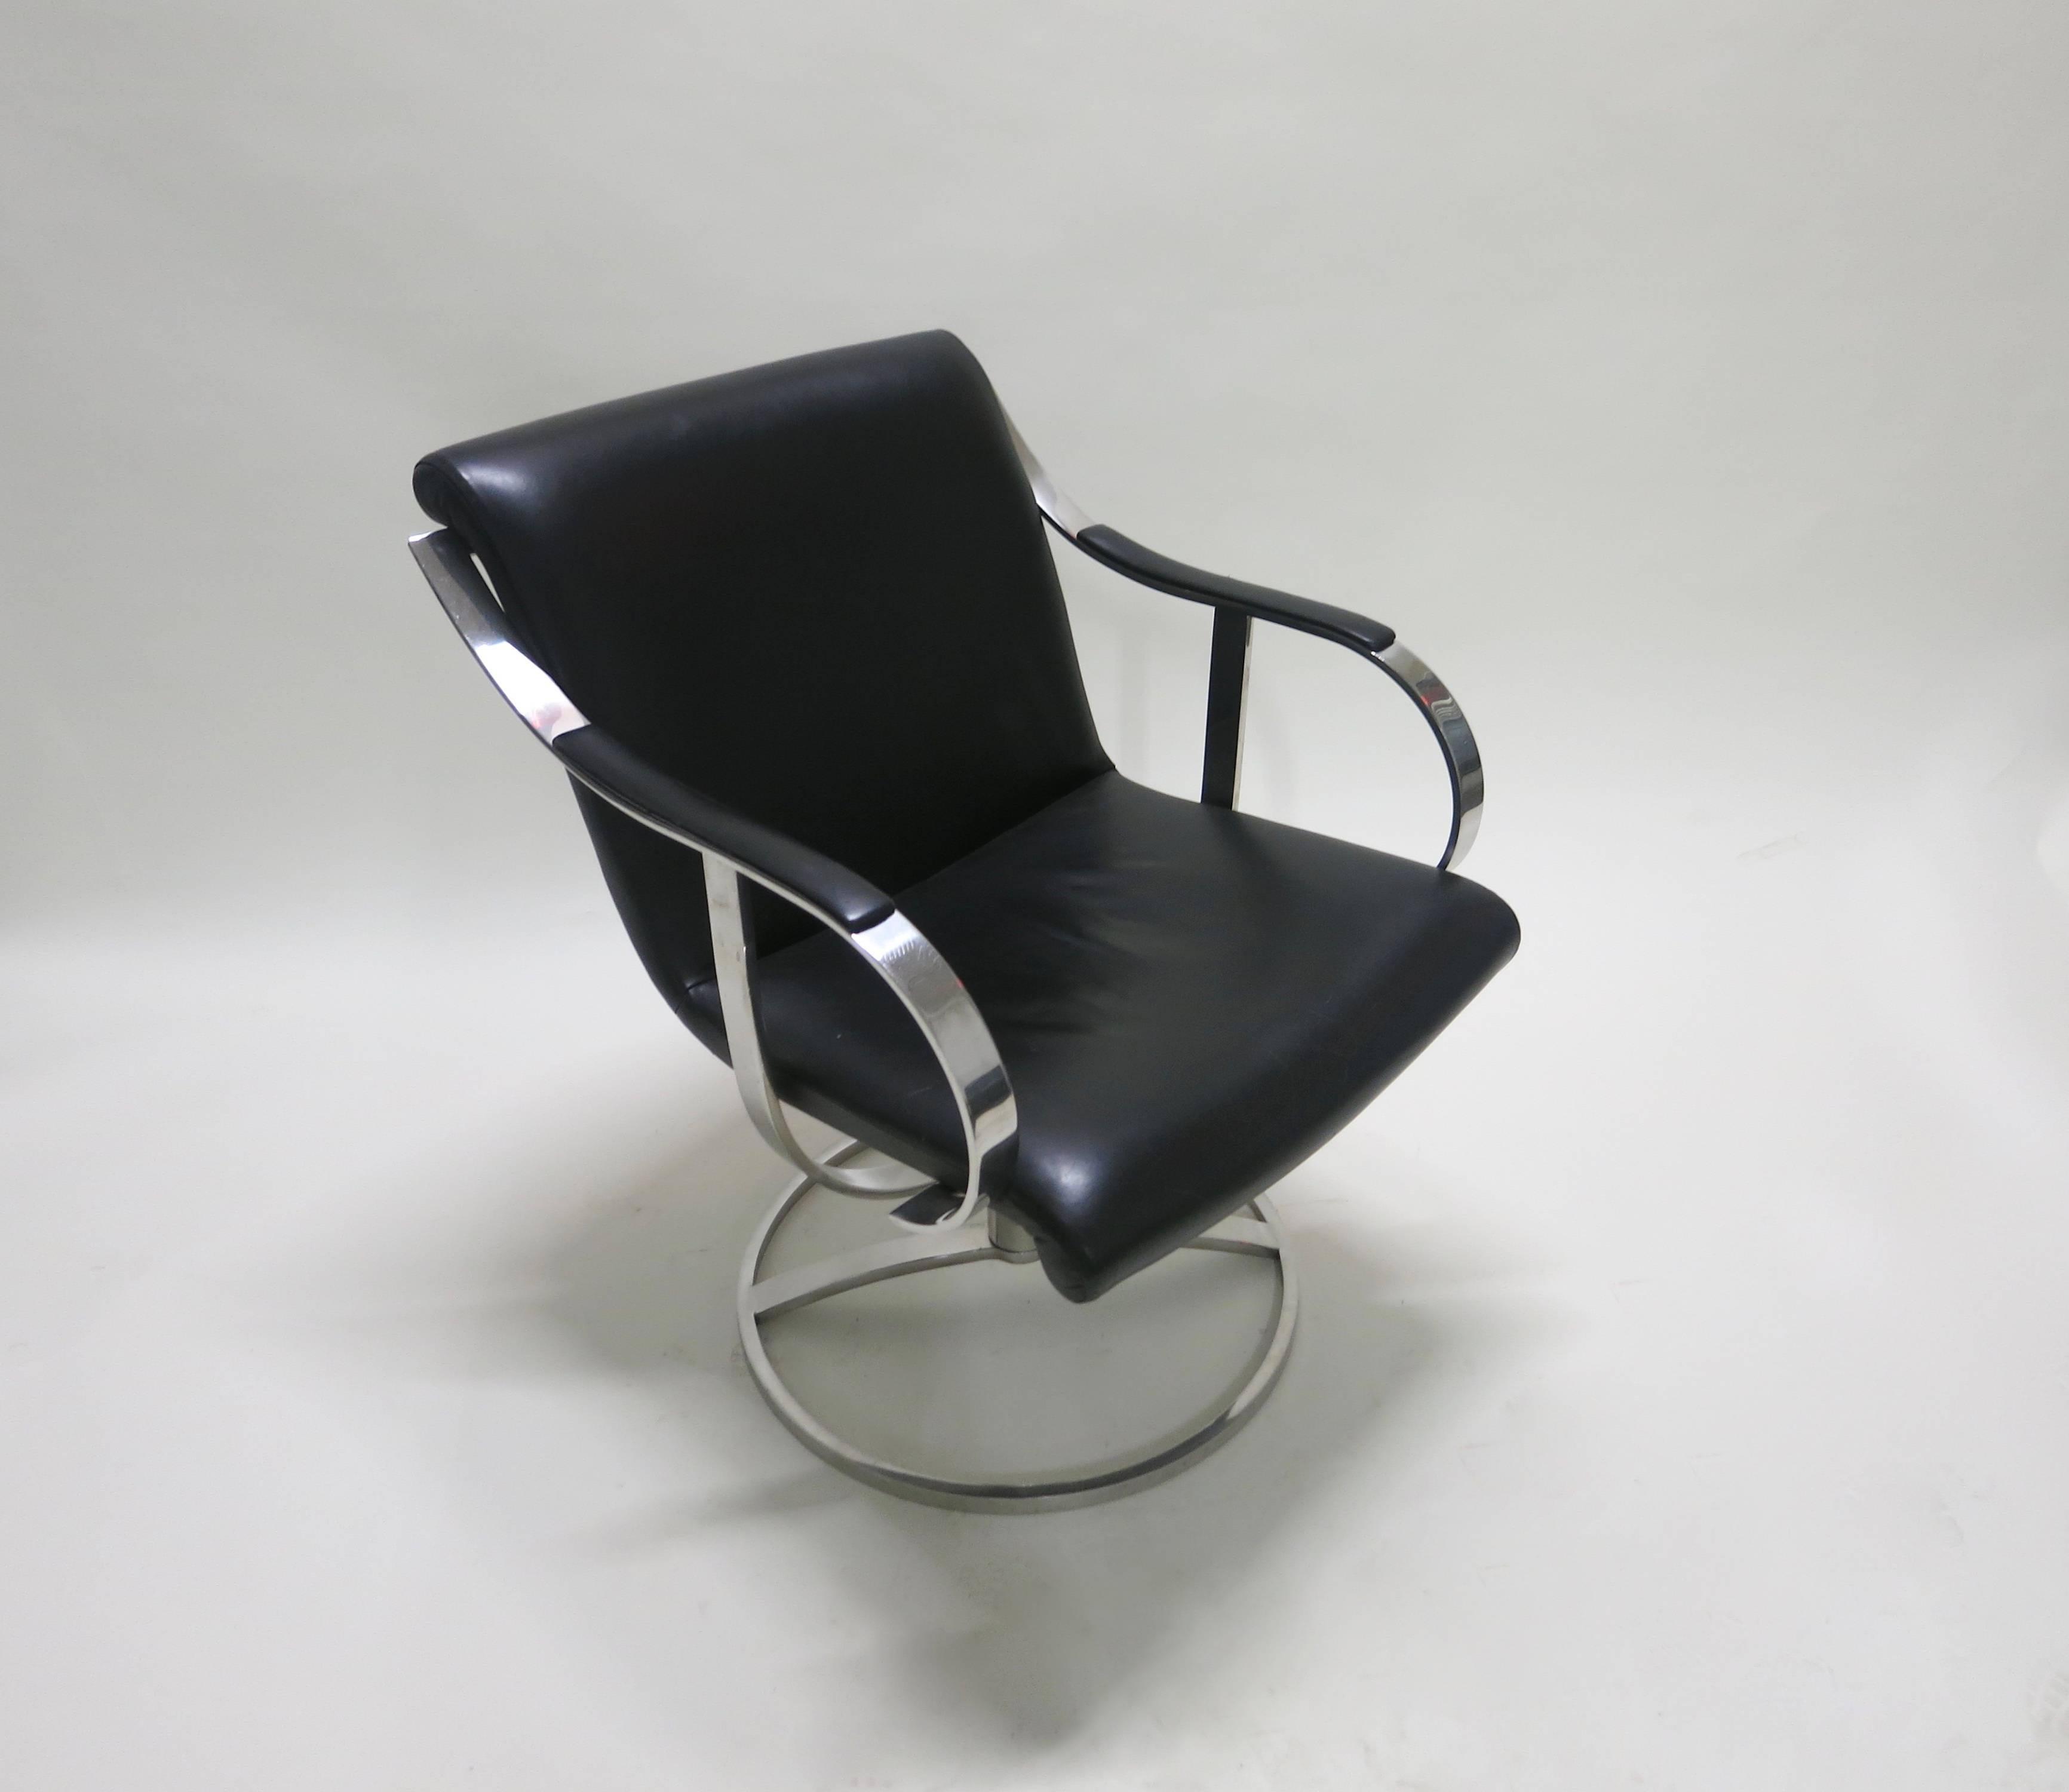 Pair of Swivel Chairs by Gardner Leaver for Steelcase, circa 1965, American 4